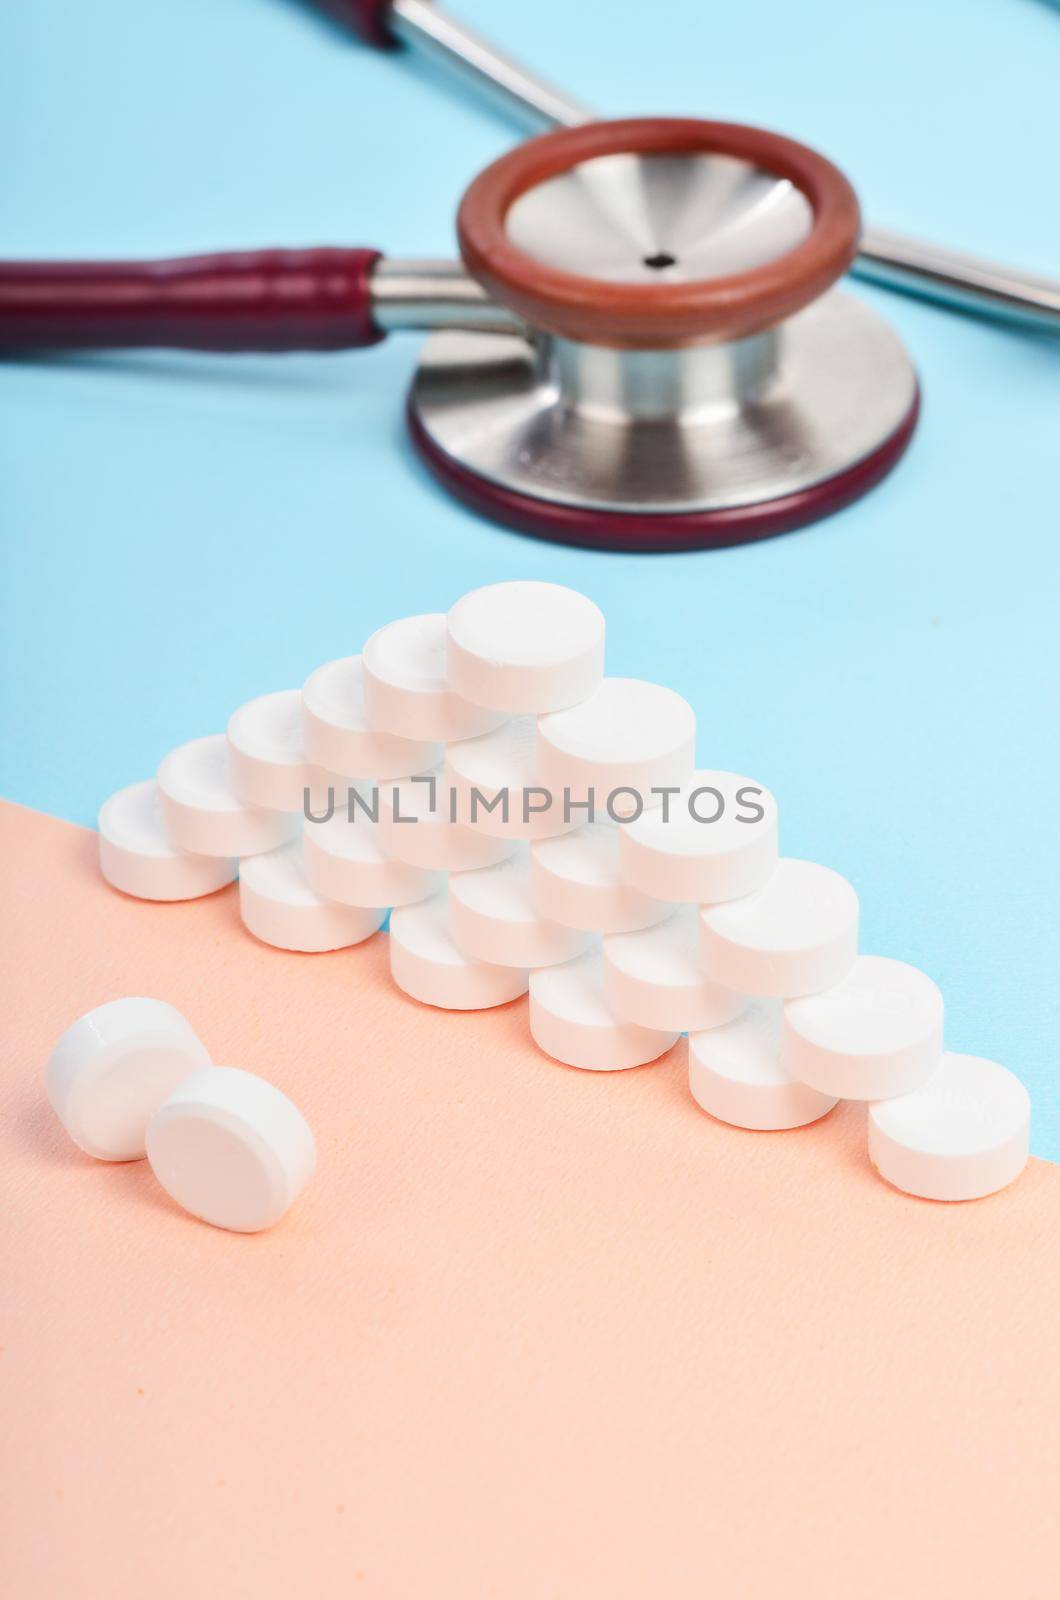 The White tablet medicine with medicine stethoscope on blue background.